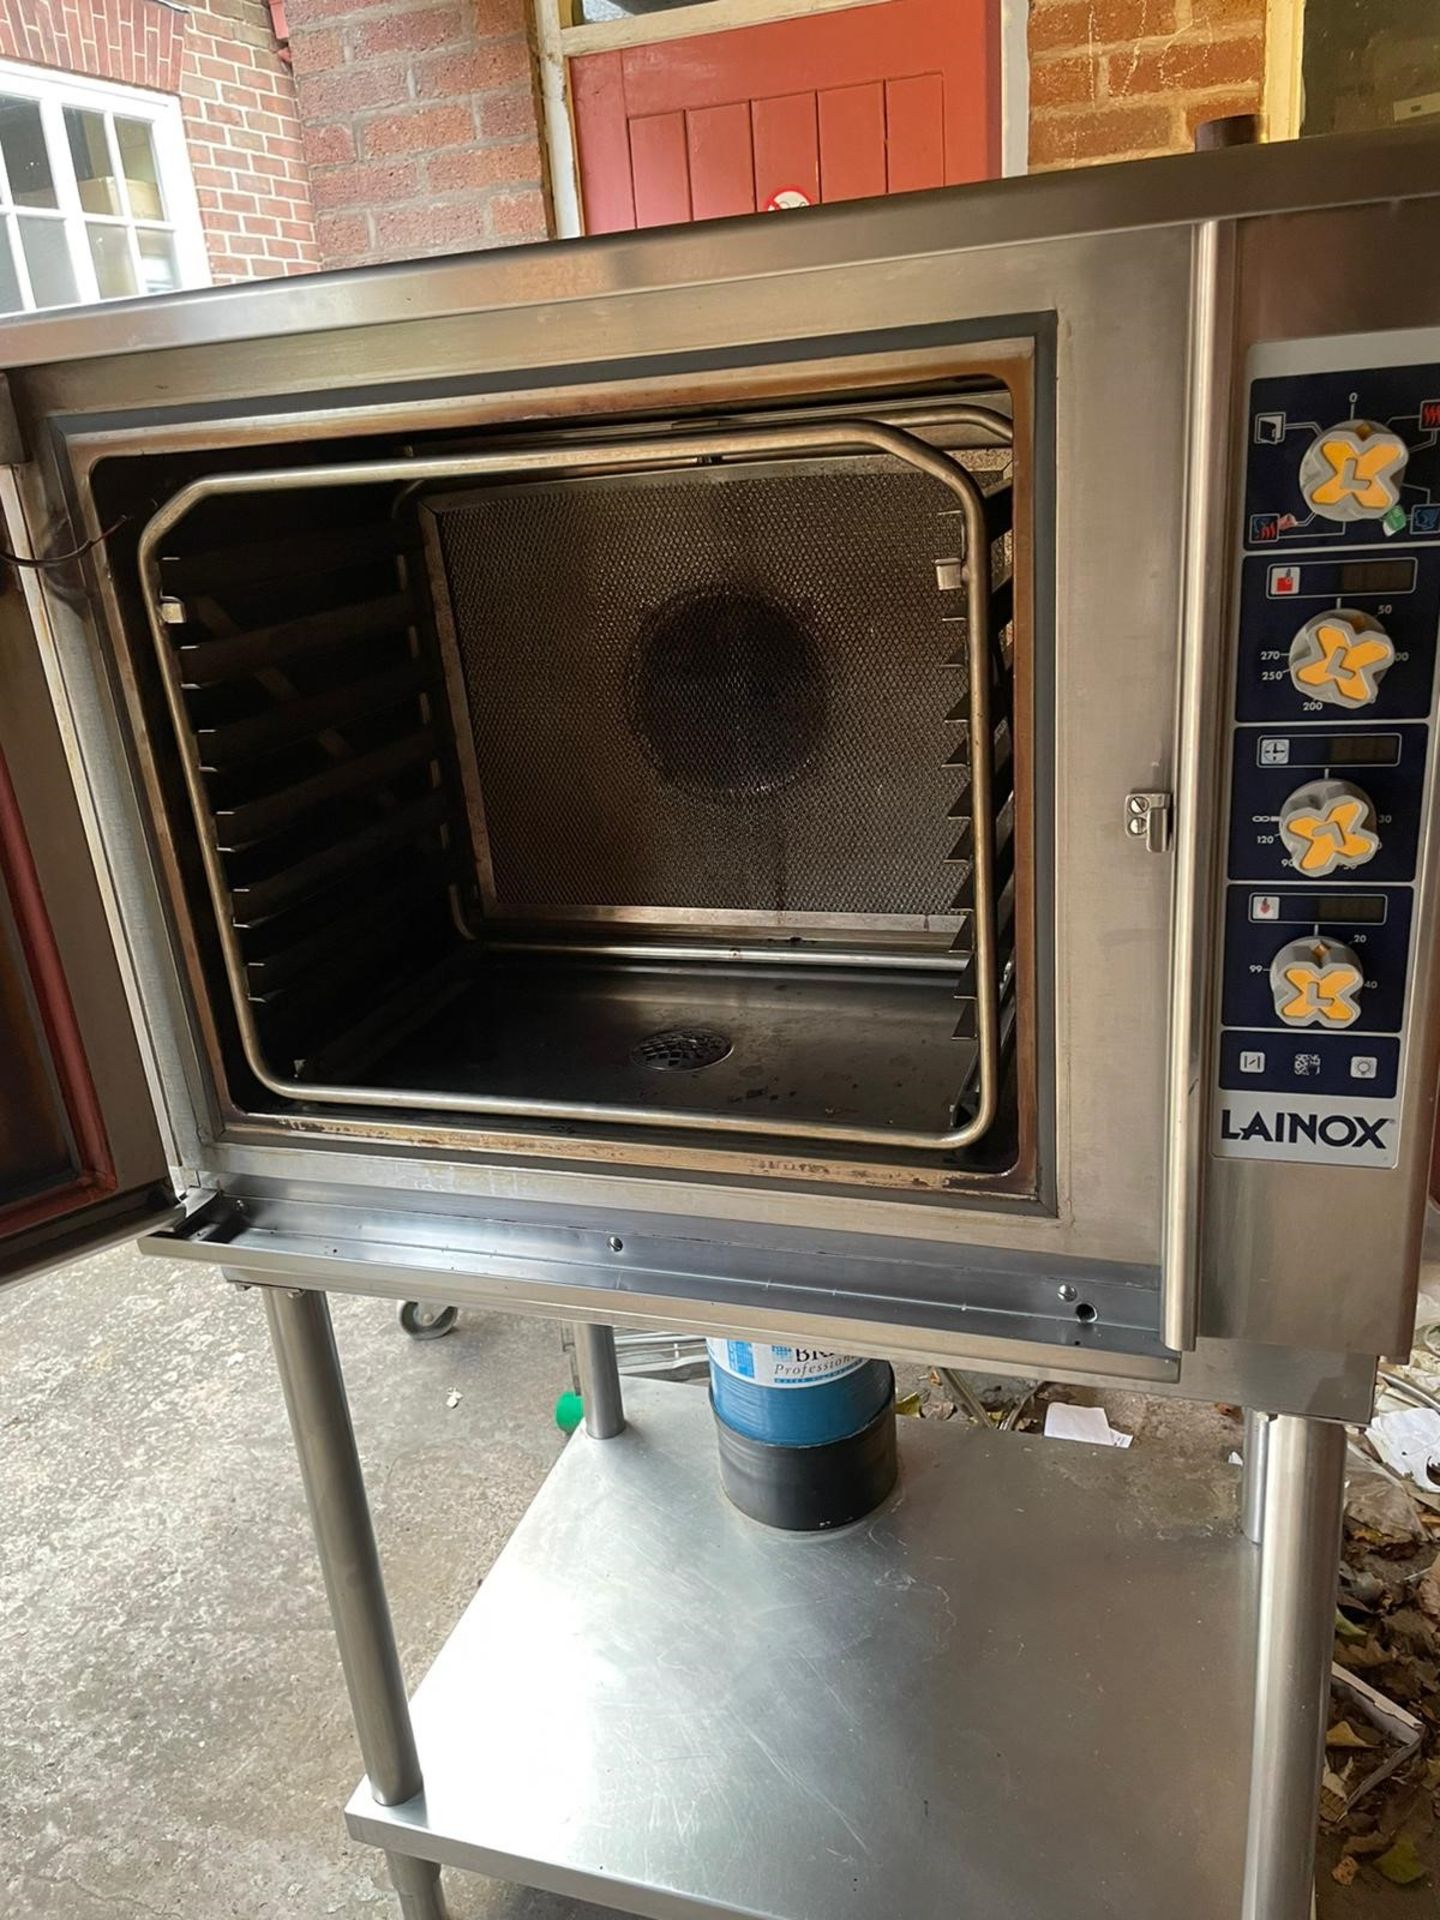 6grid lainox combi oven with stand